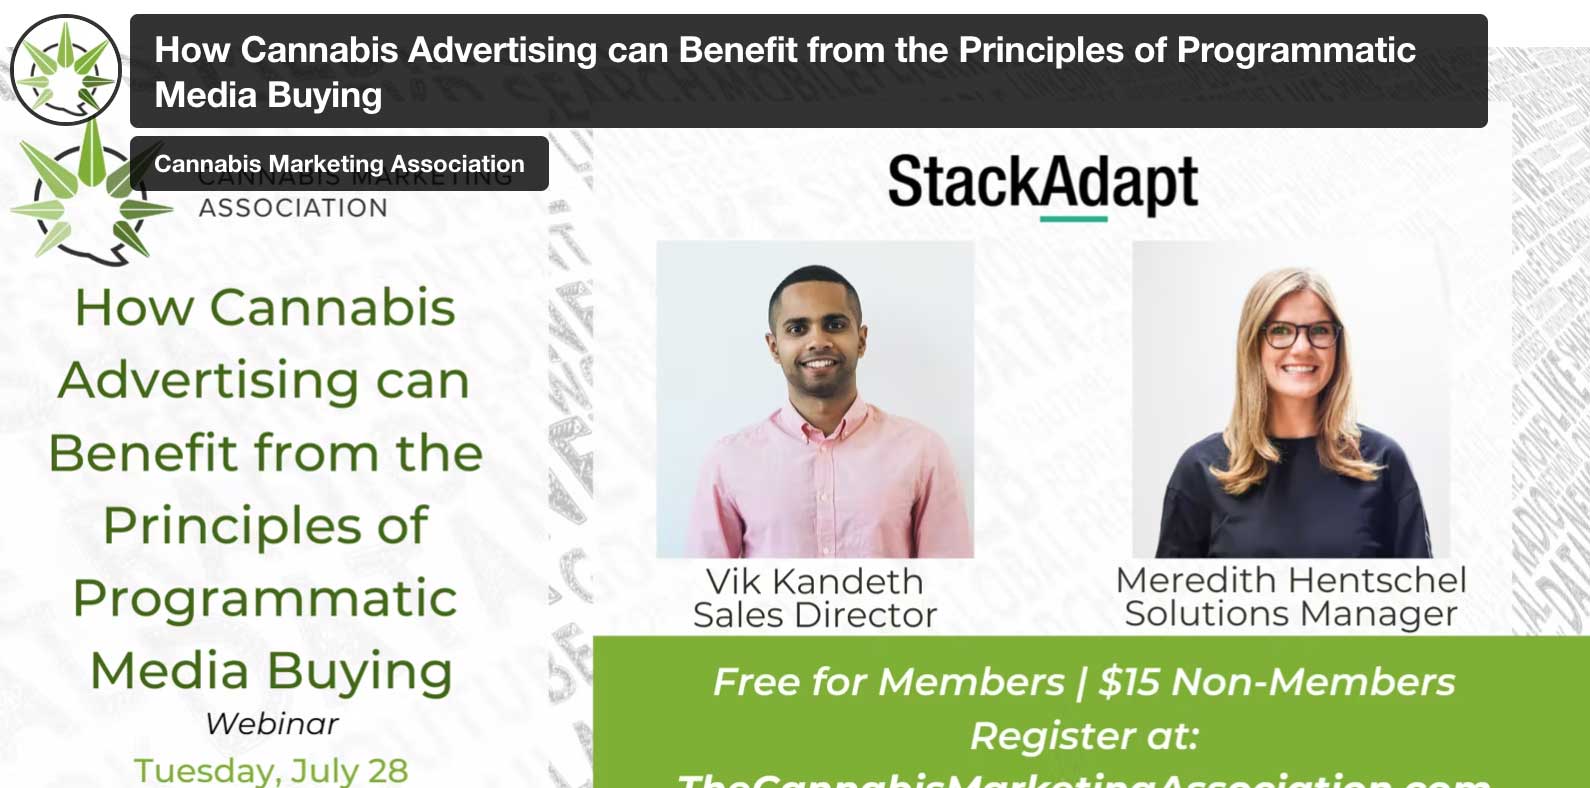 CMA: How Cannabis Advertising Can Benefit from the Principles of Programmatic Media Buying